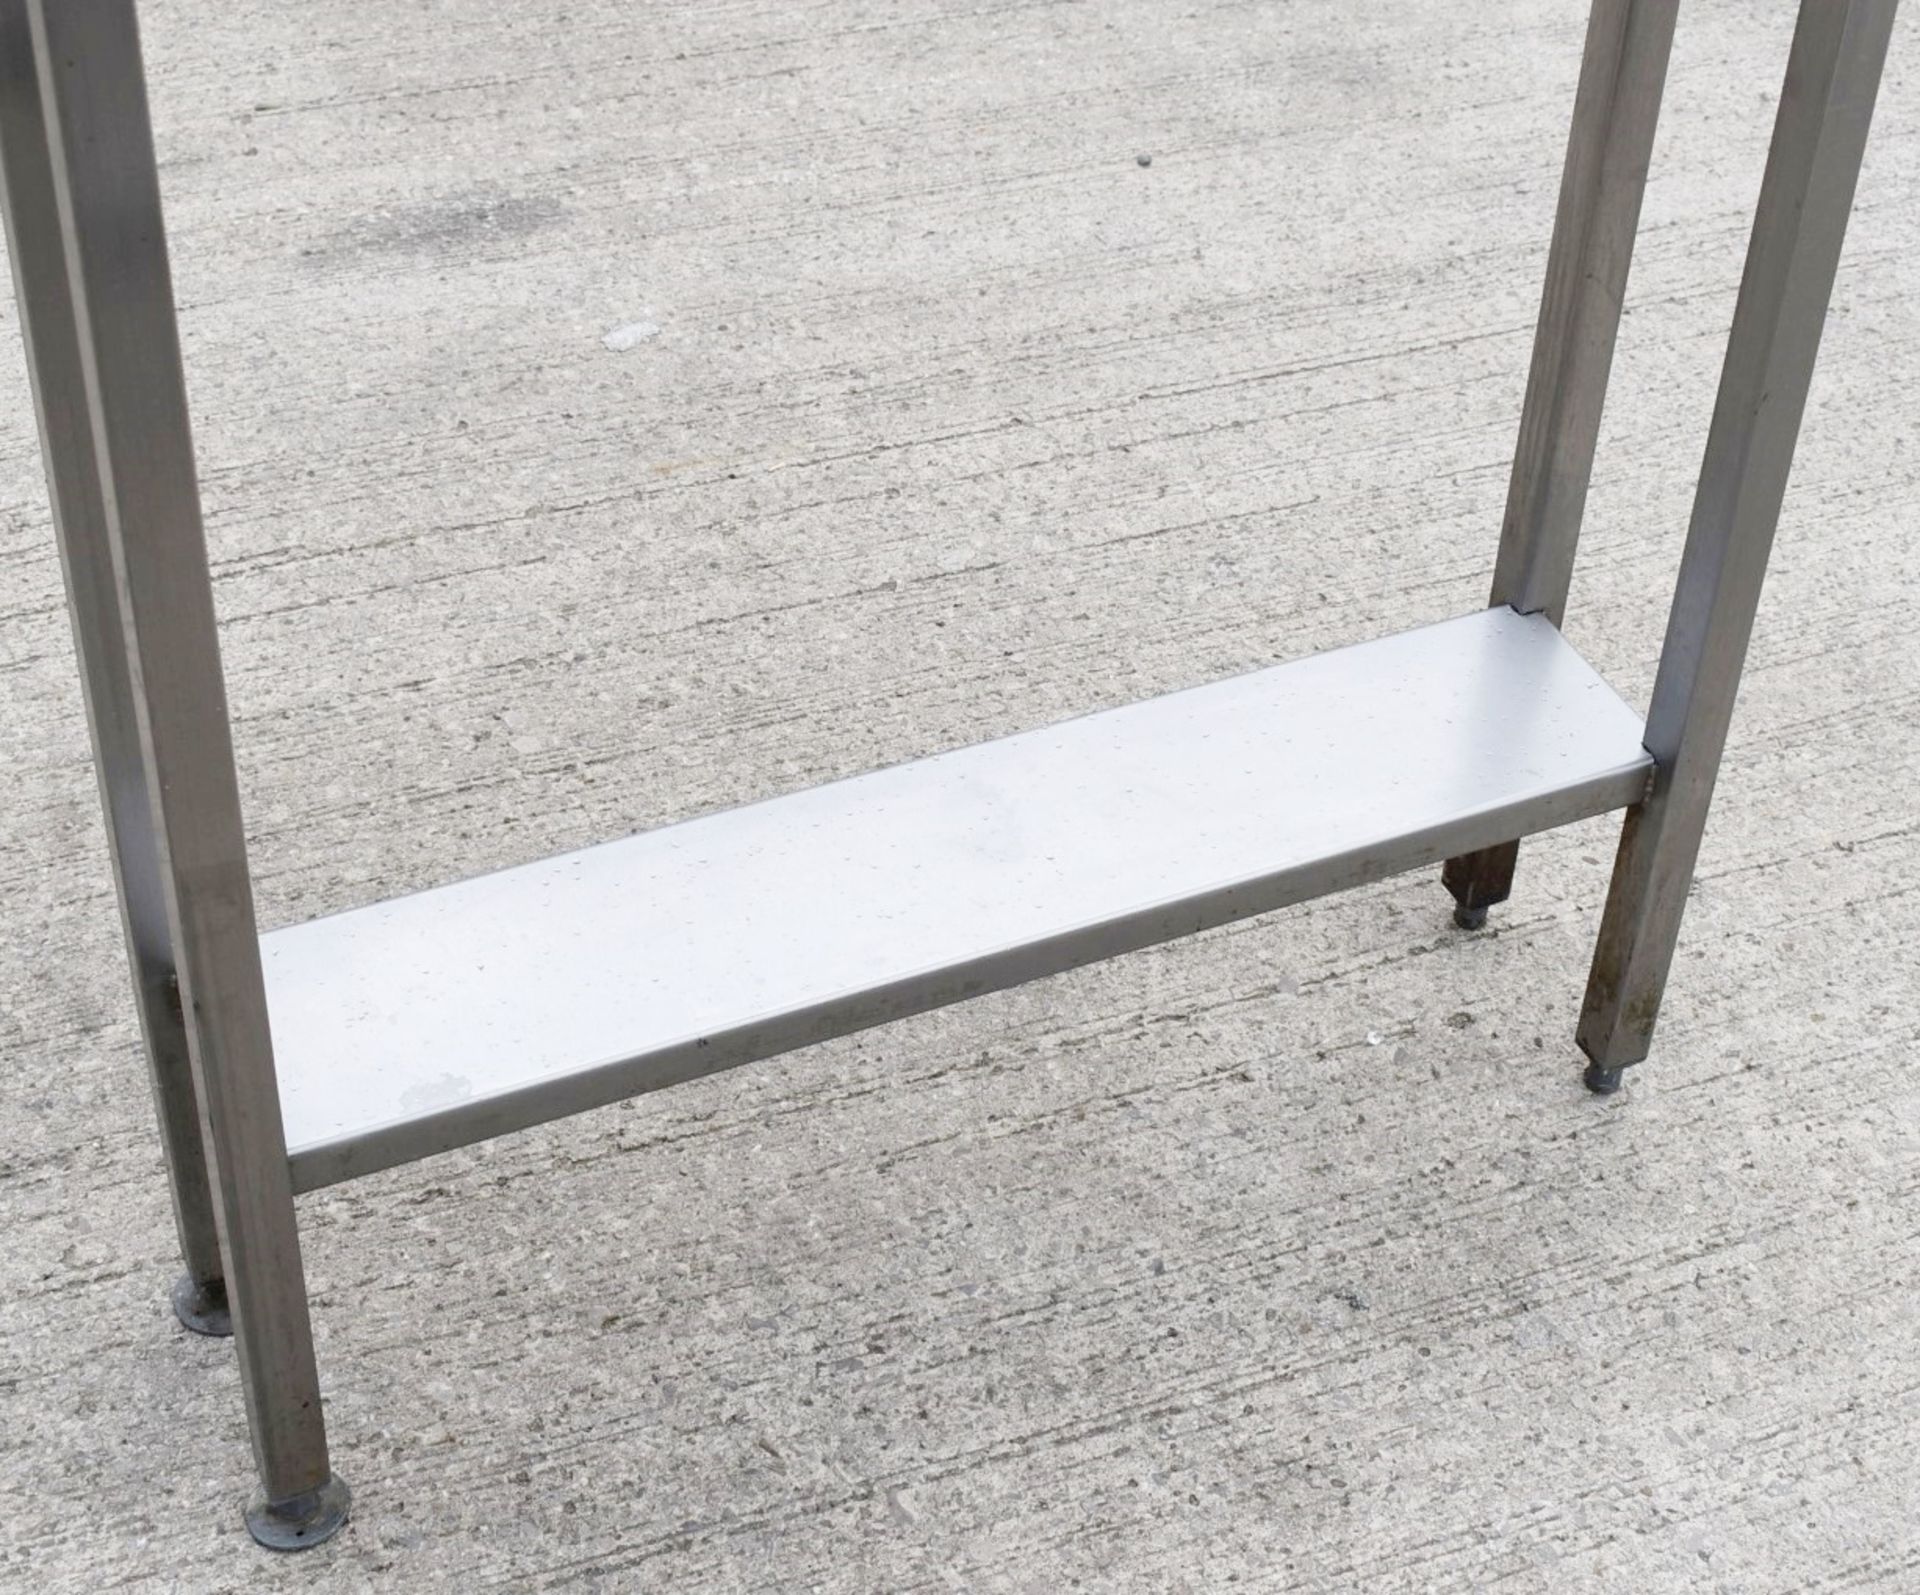 1 x Stainless Steel Corner Infill Prep Bench - Dimensions: H91 x W30 x D90 cms - CL740 - Ref: HON140 - Image 3 of 4